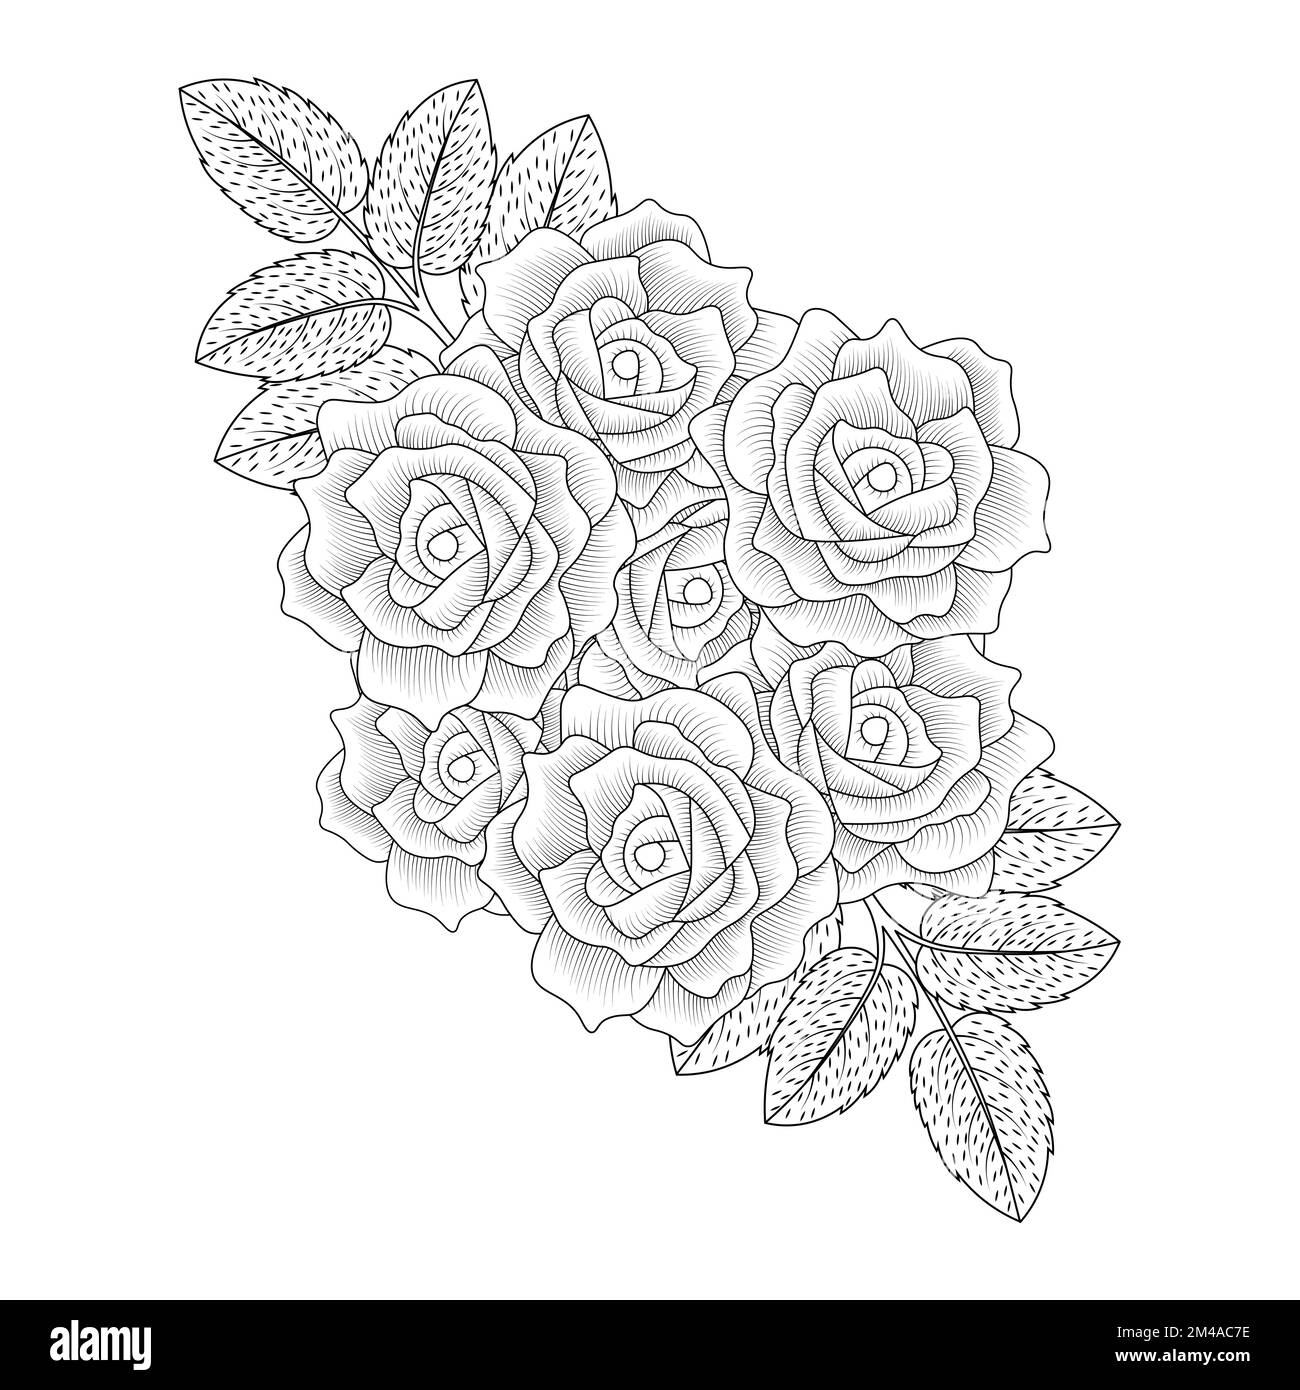 How to draw rose step by step: Realistic rose drawing easy with pencil-saigonsouth.com.vn